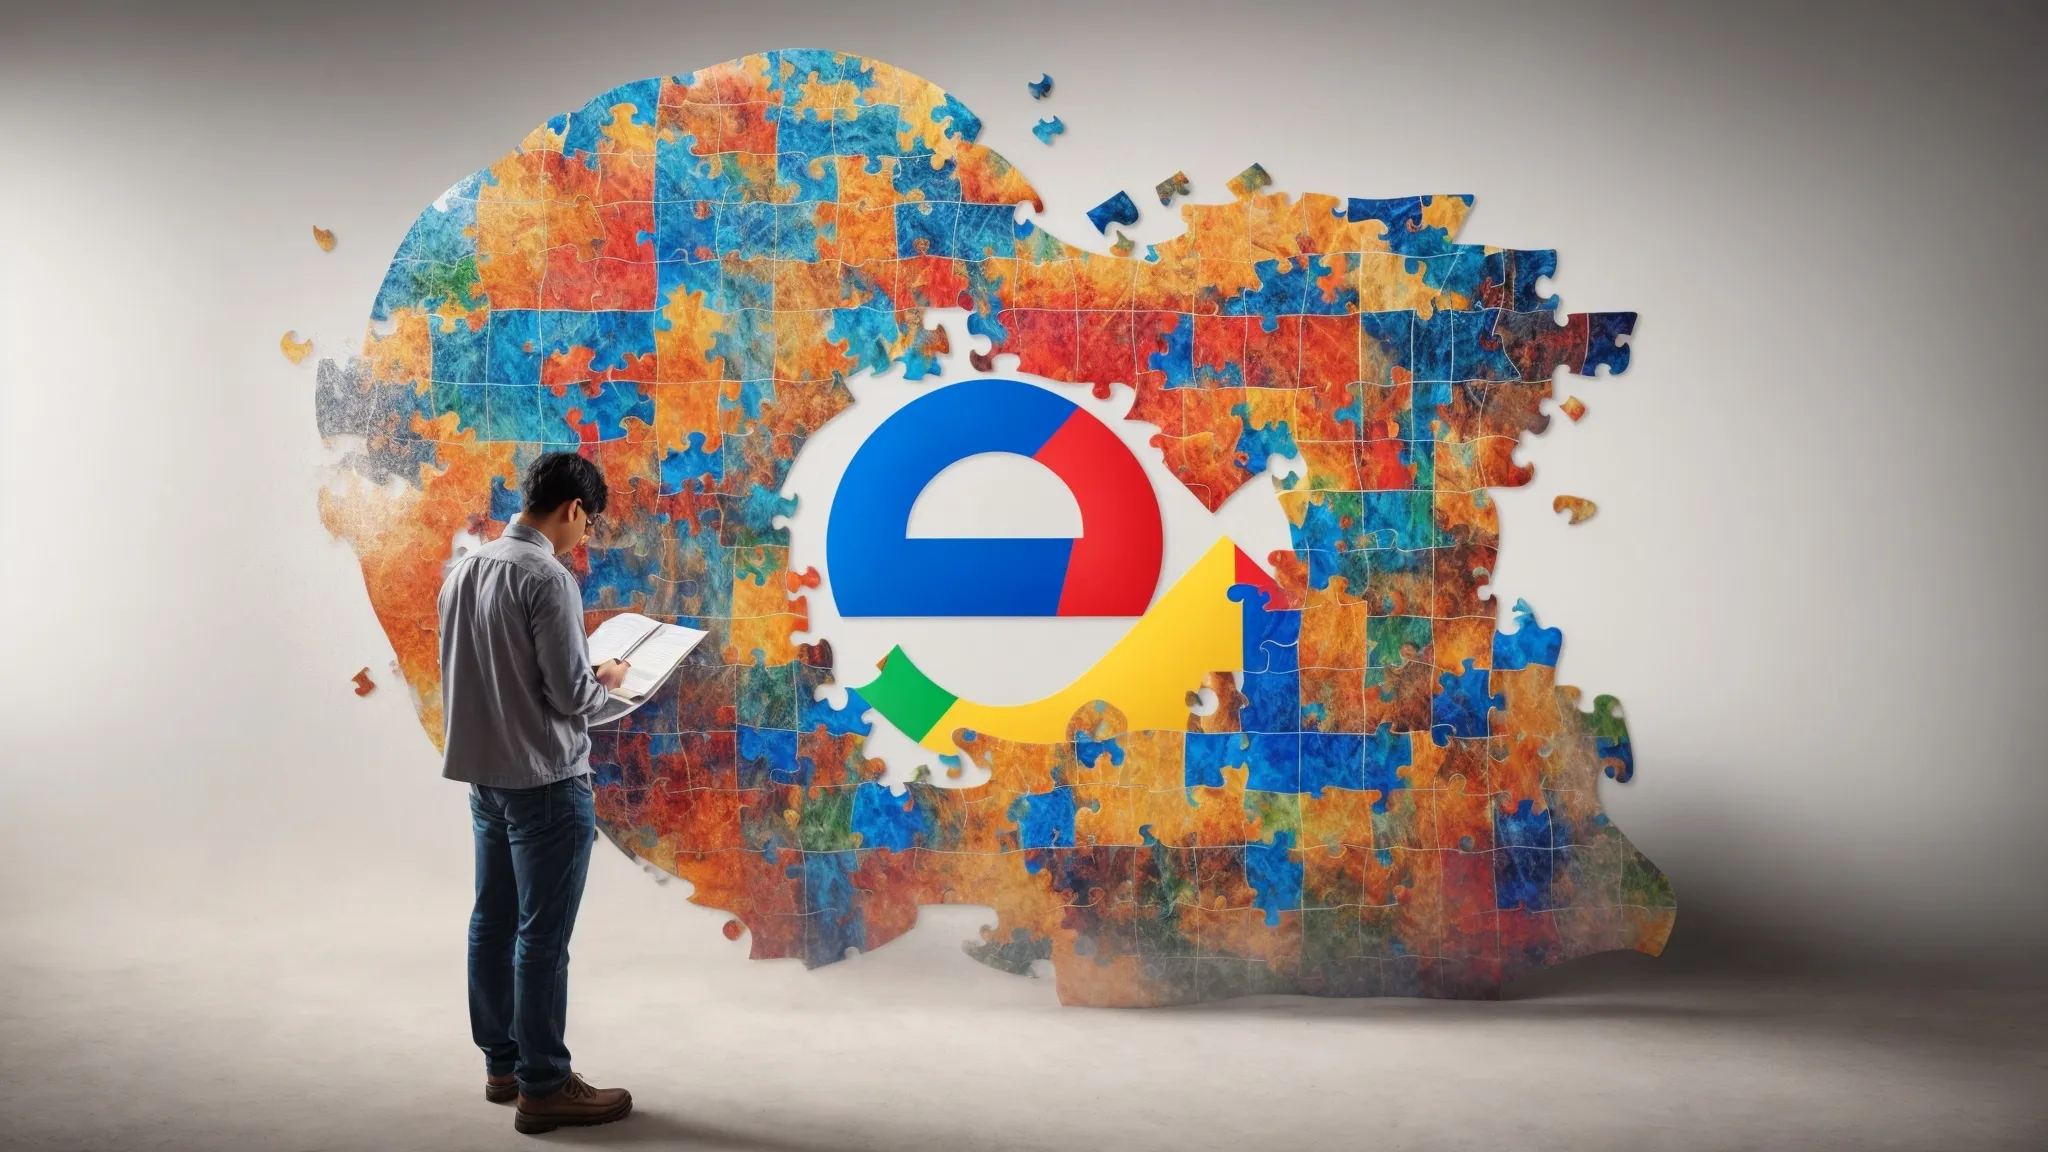 a person studying a large puzzle shaped like the google logo, symbolizing the analysis of search engine rankings.